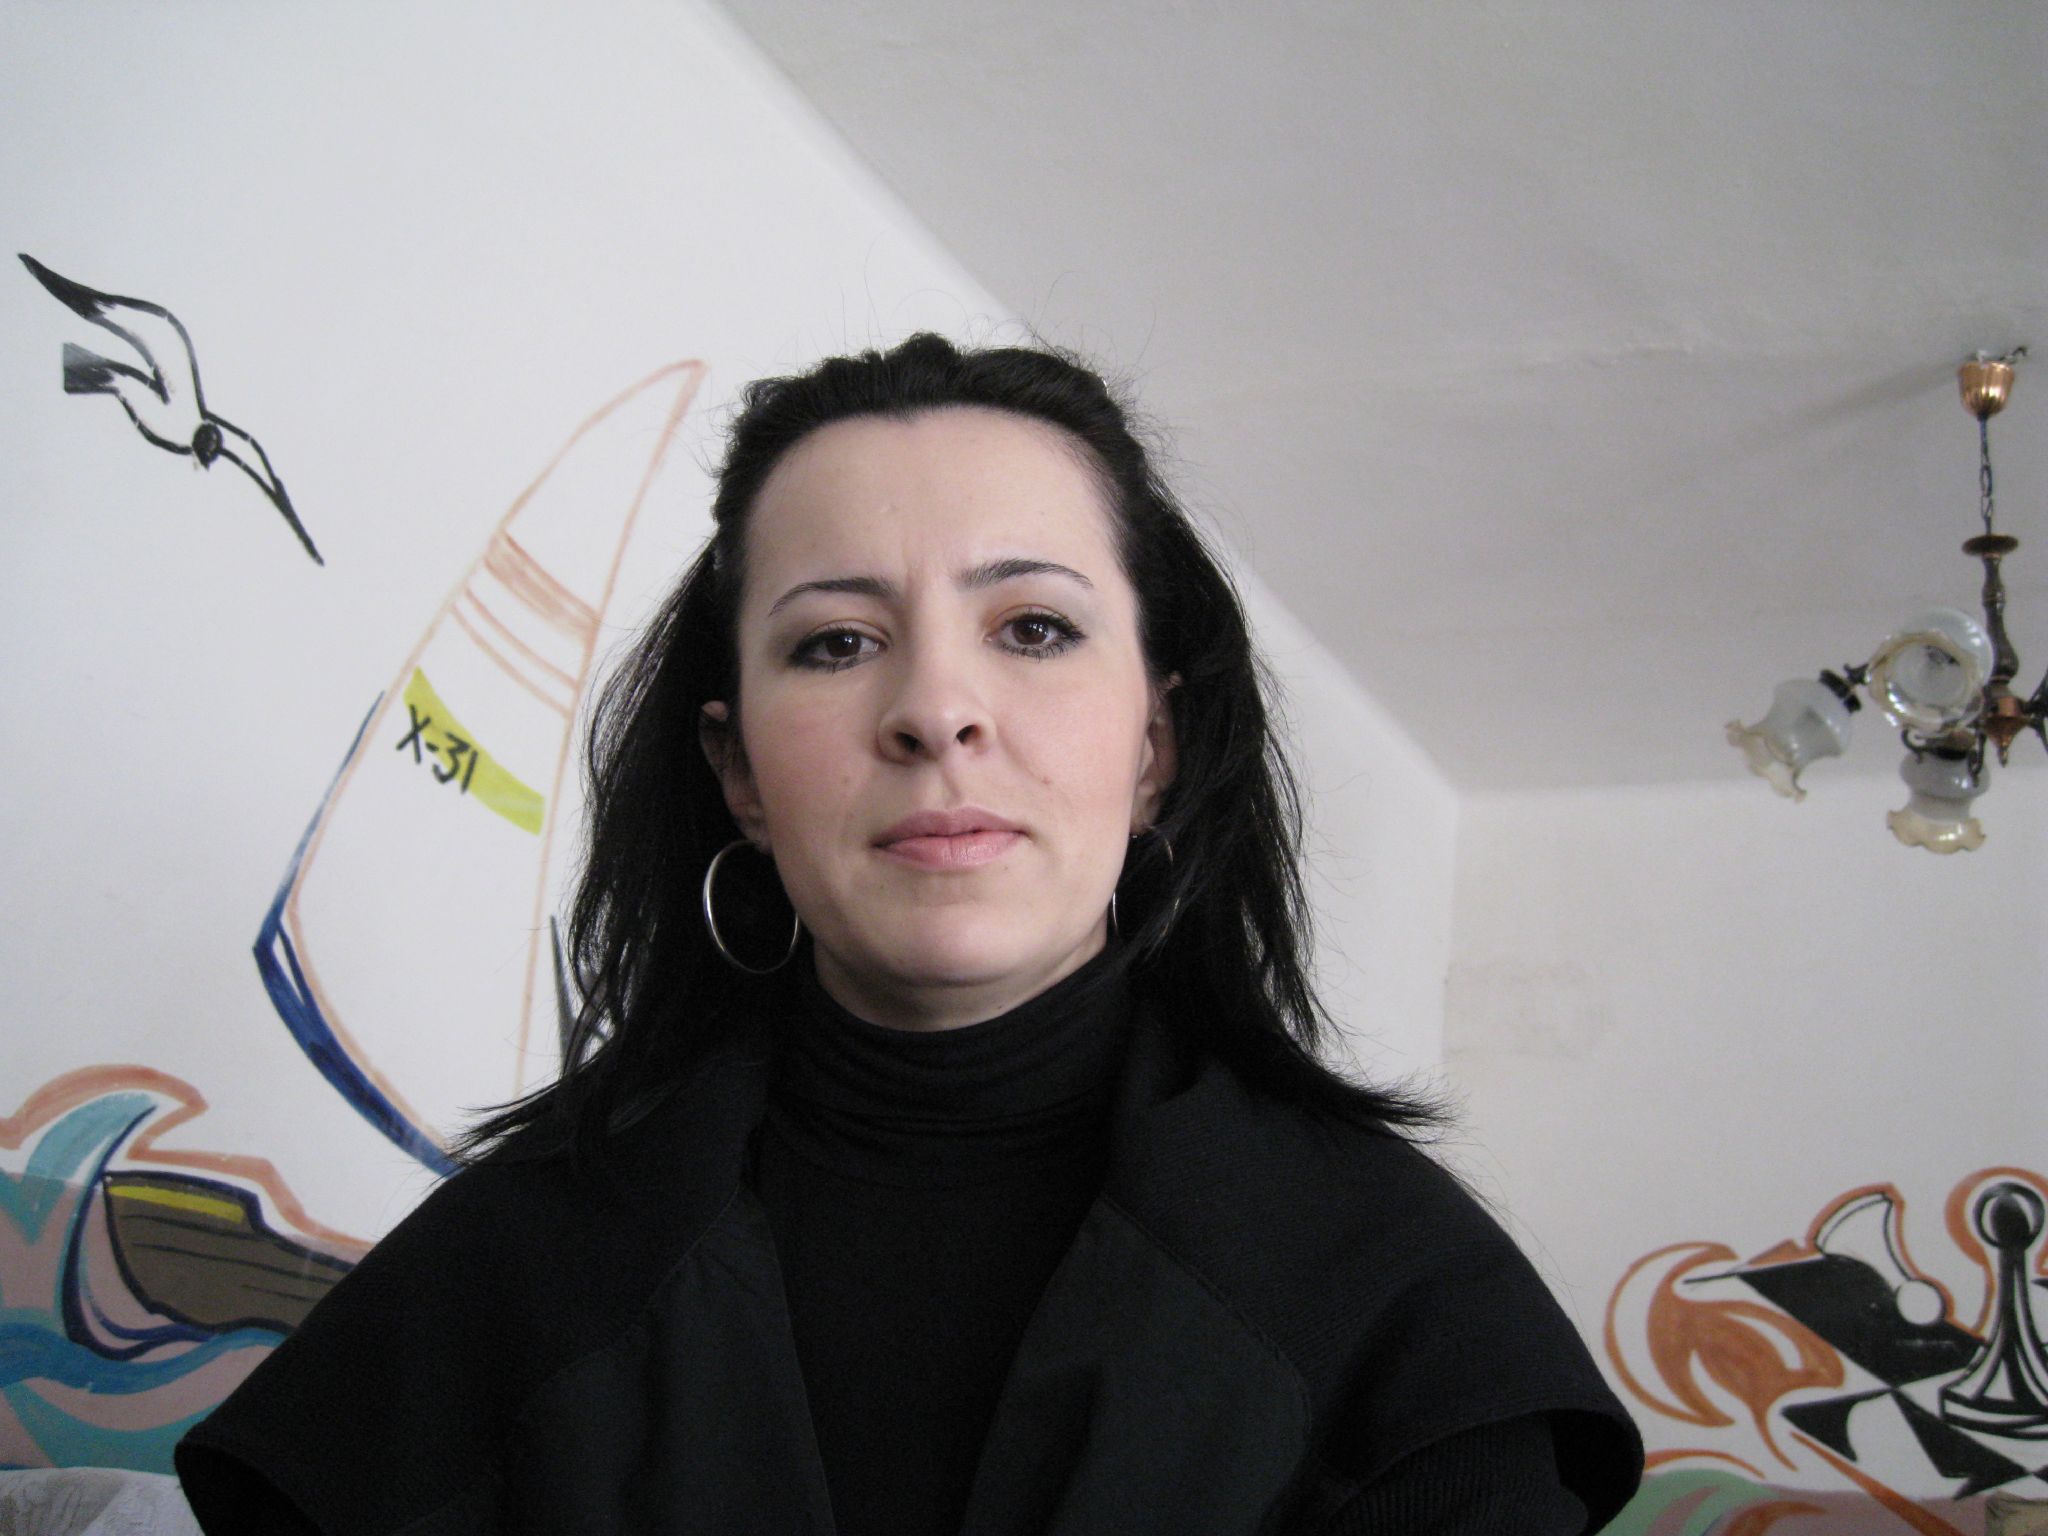 the woman has long hair and black clothing in front of a wall with paintings